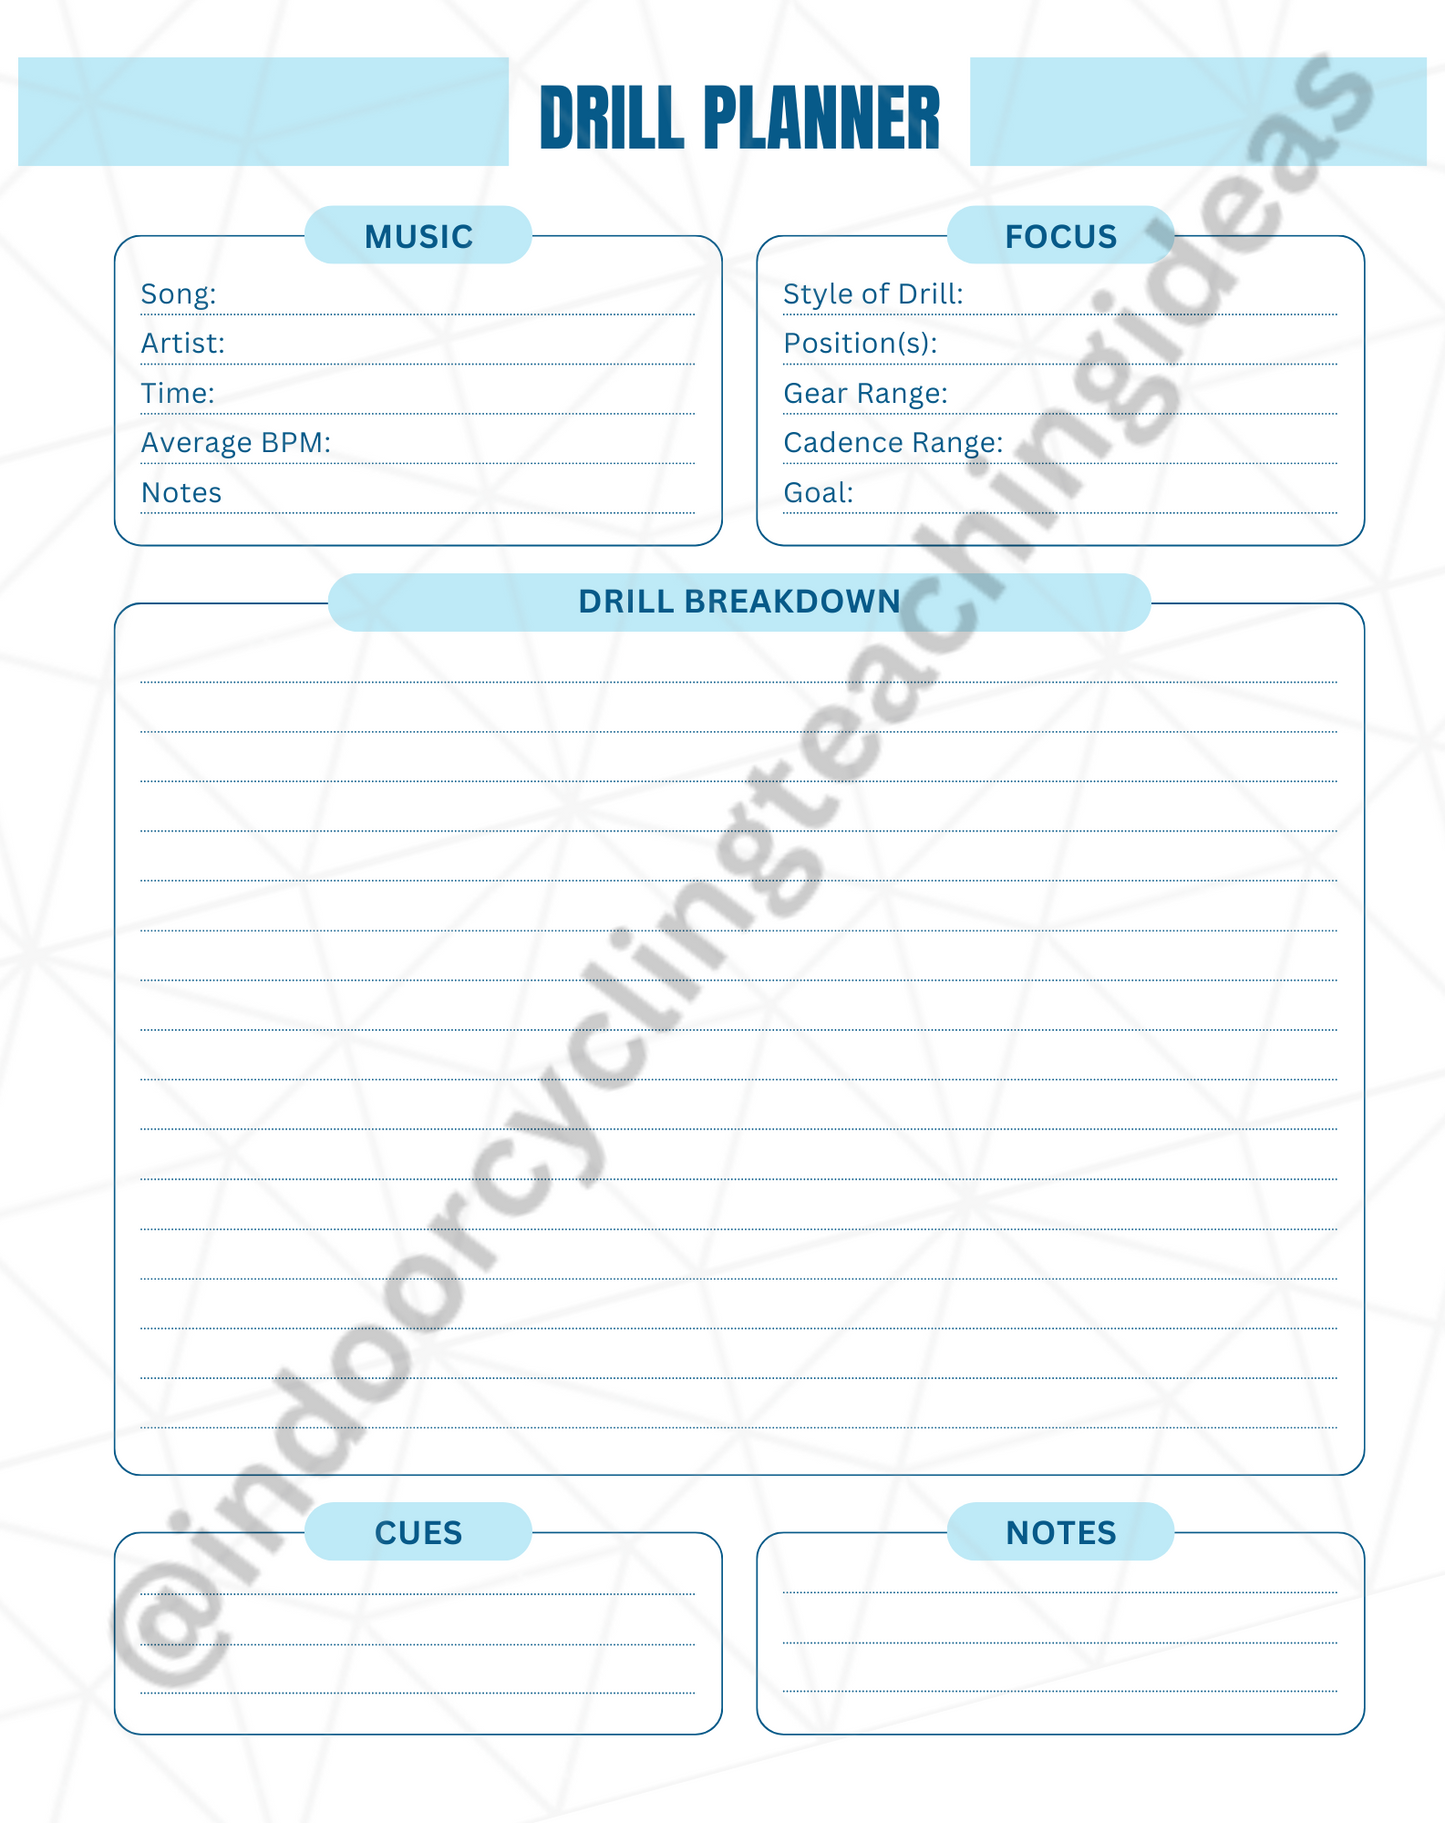 Printable Lesson Planner for Indoor Cycling Instructors